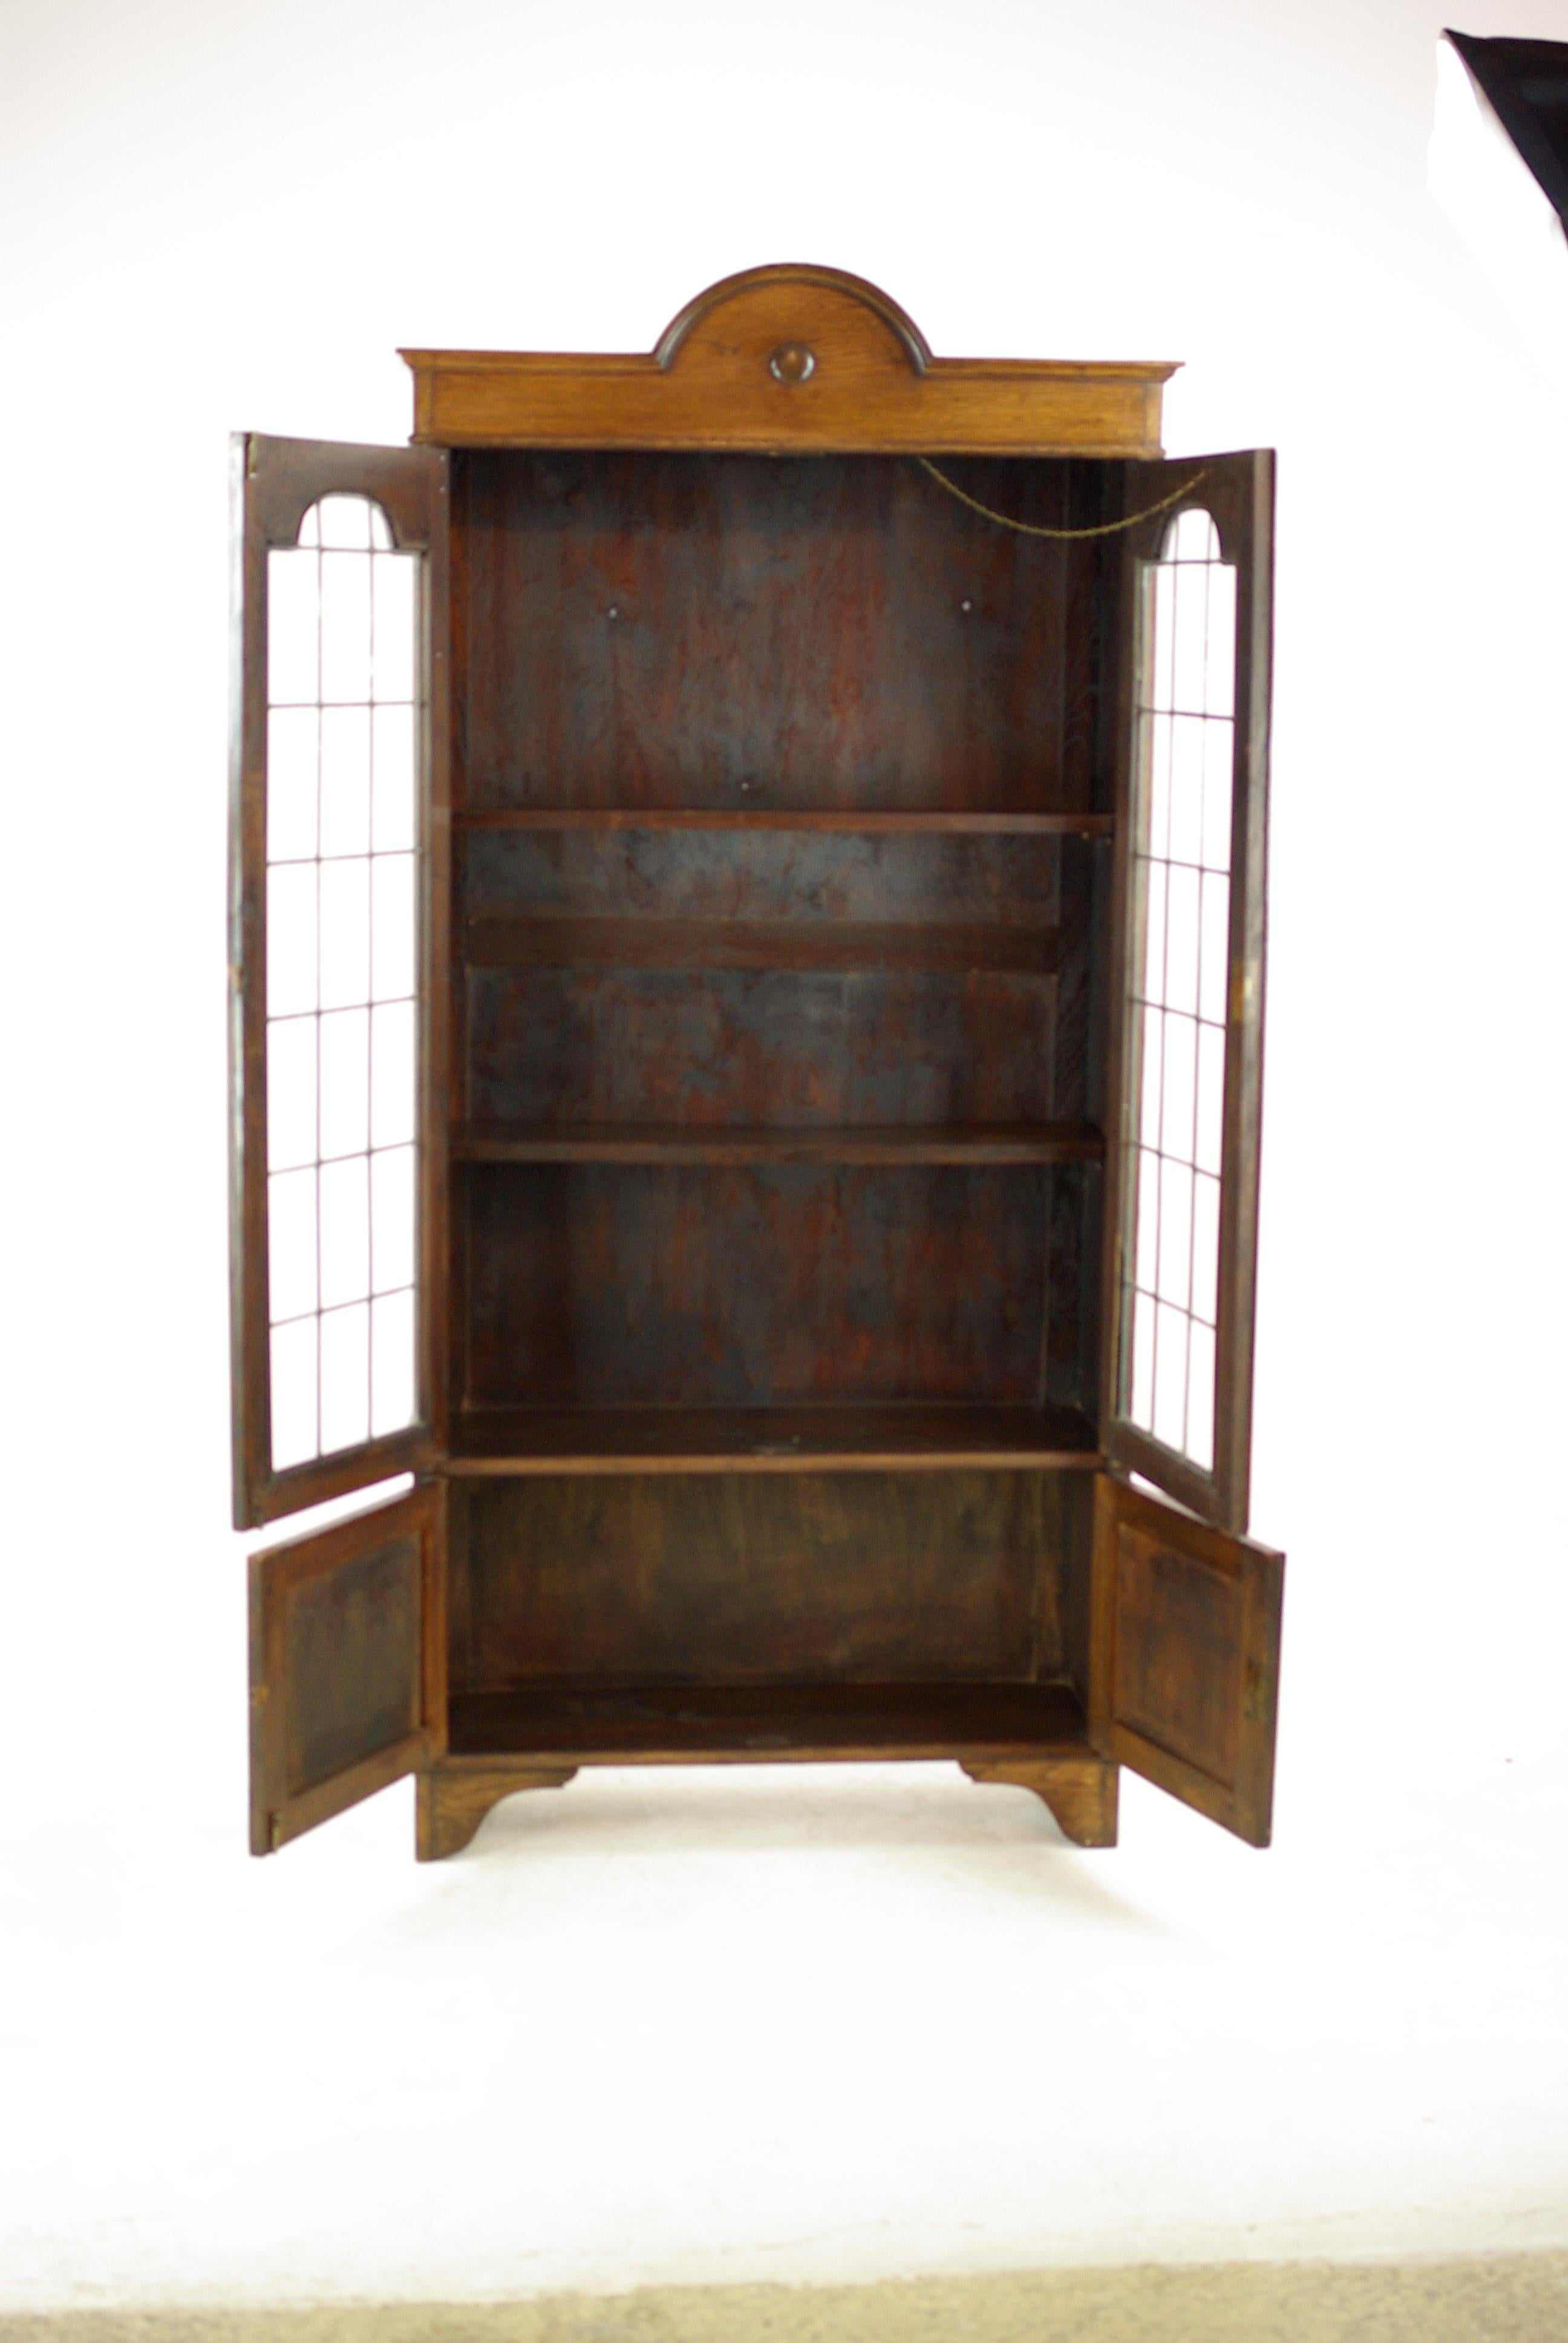 Antique Arts & Crafts bookcase, oak bookcase, leaded glass, antique furniture, B1203

Scotland, 1910
Solid oak
Original finish
Half moon cornice
Pair of original leaded glass doors
Fitted with three solid wooden adjustable shelves
Two door